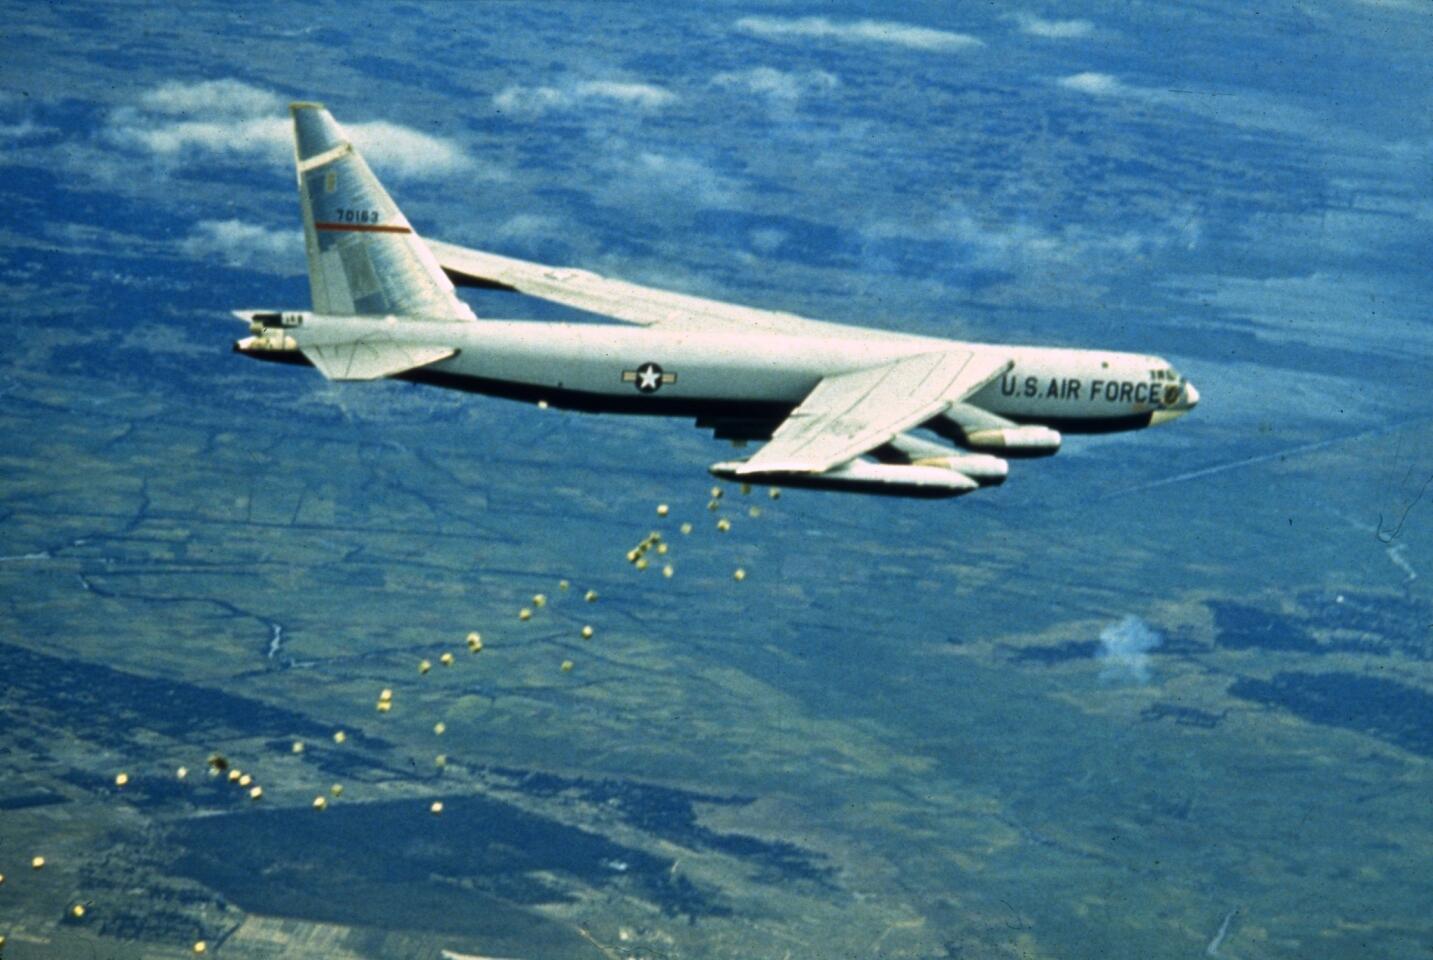 An American B-52 bomber over Vietnam in 1966.